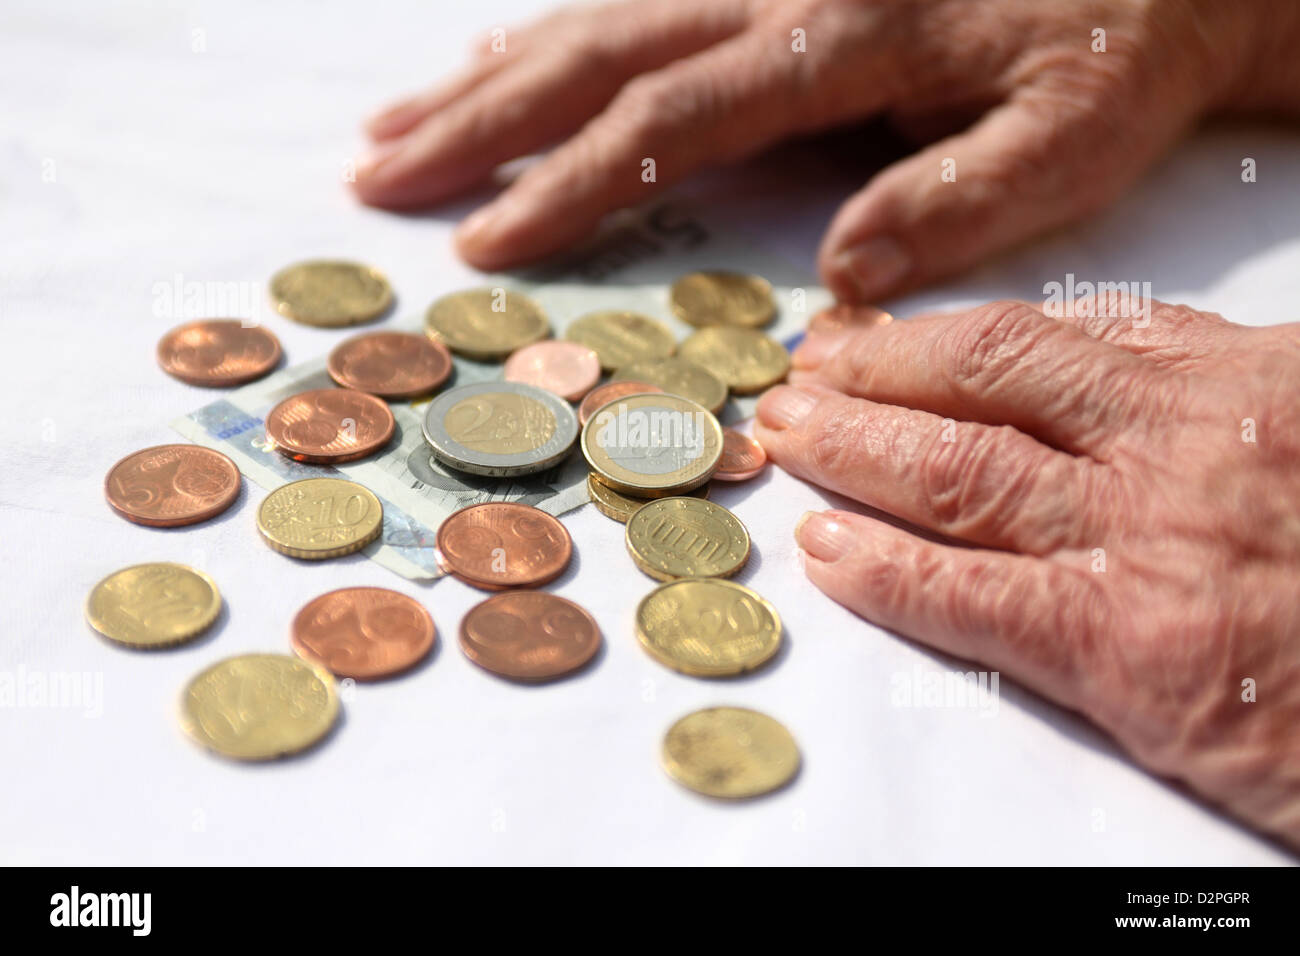 Berlin, Germany, the hands are a pensioner on money Stock Photo